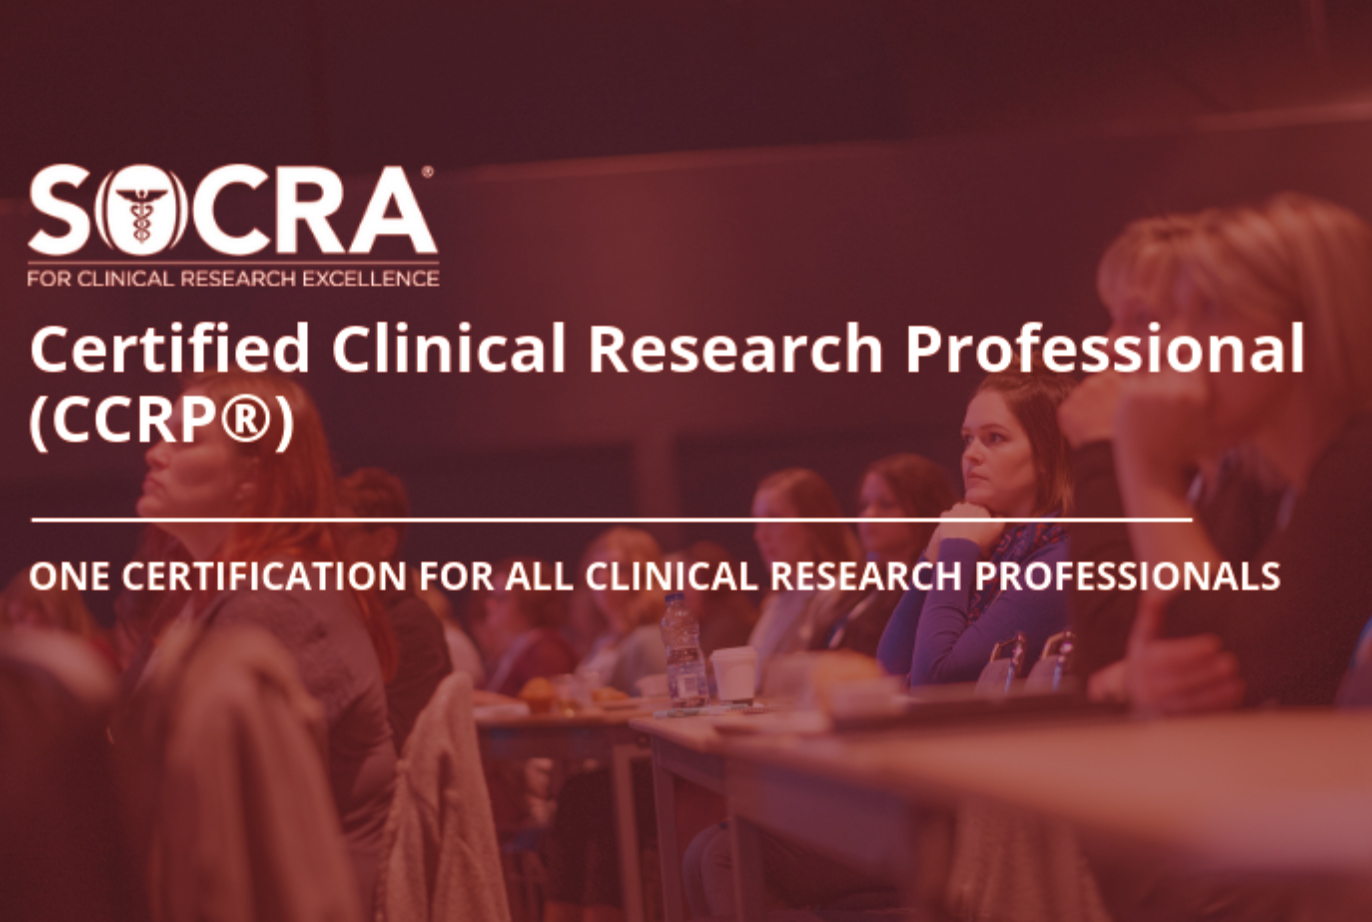 clinical research certification socra